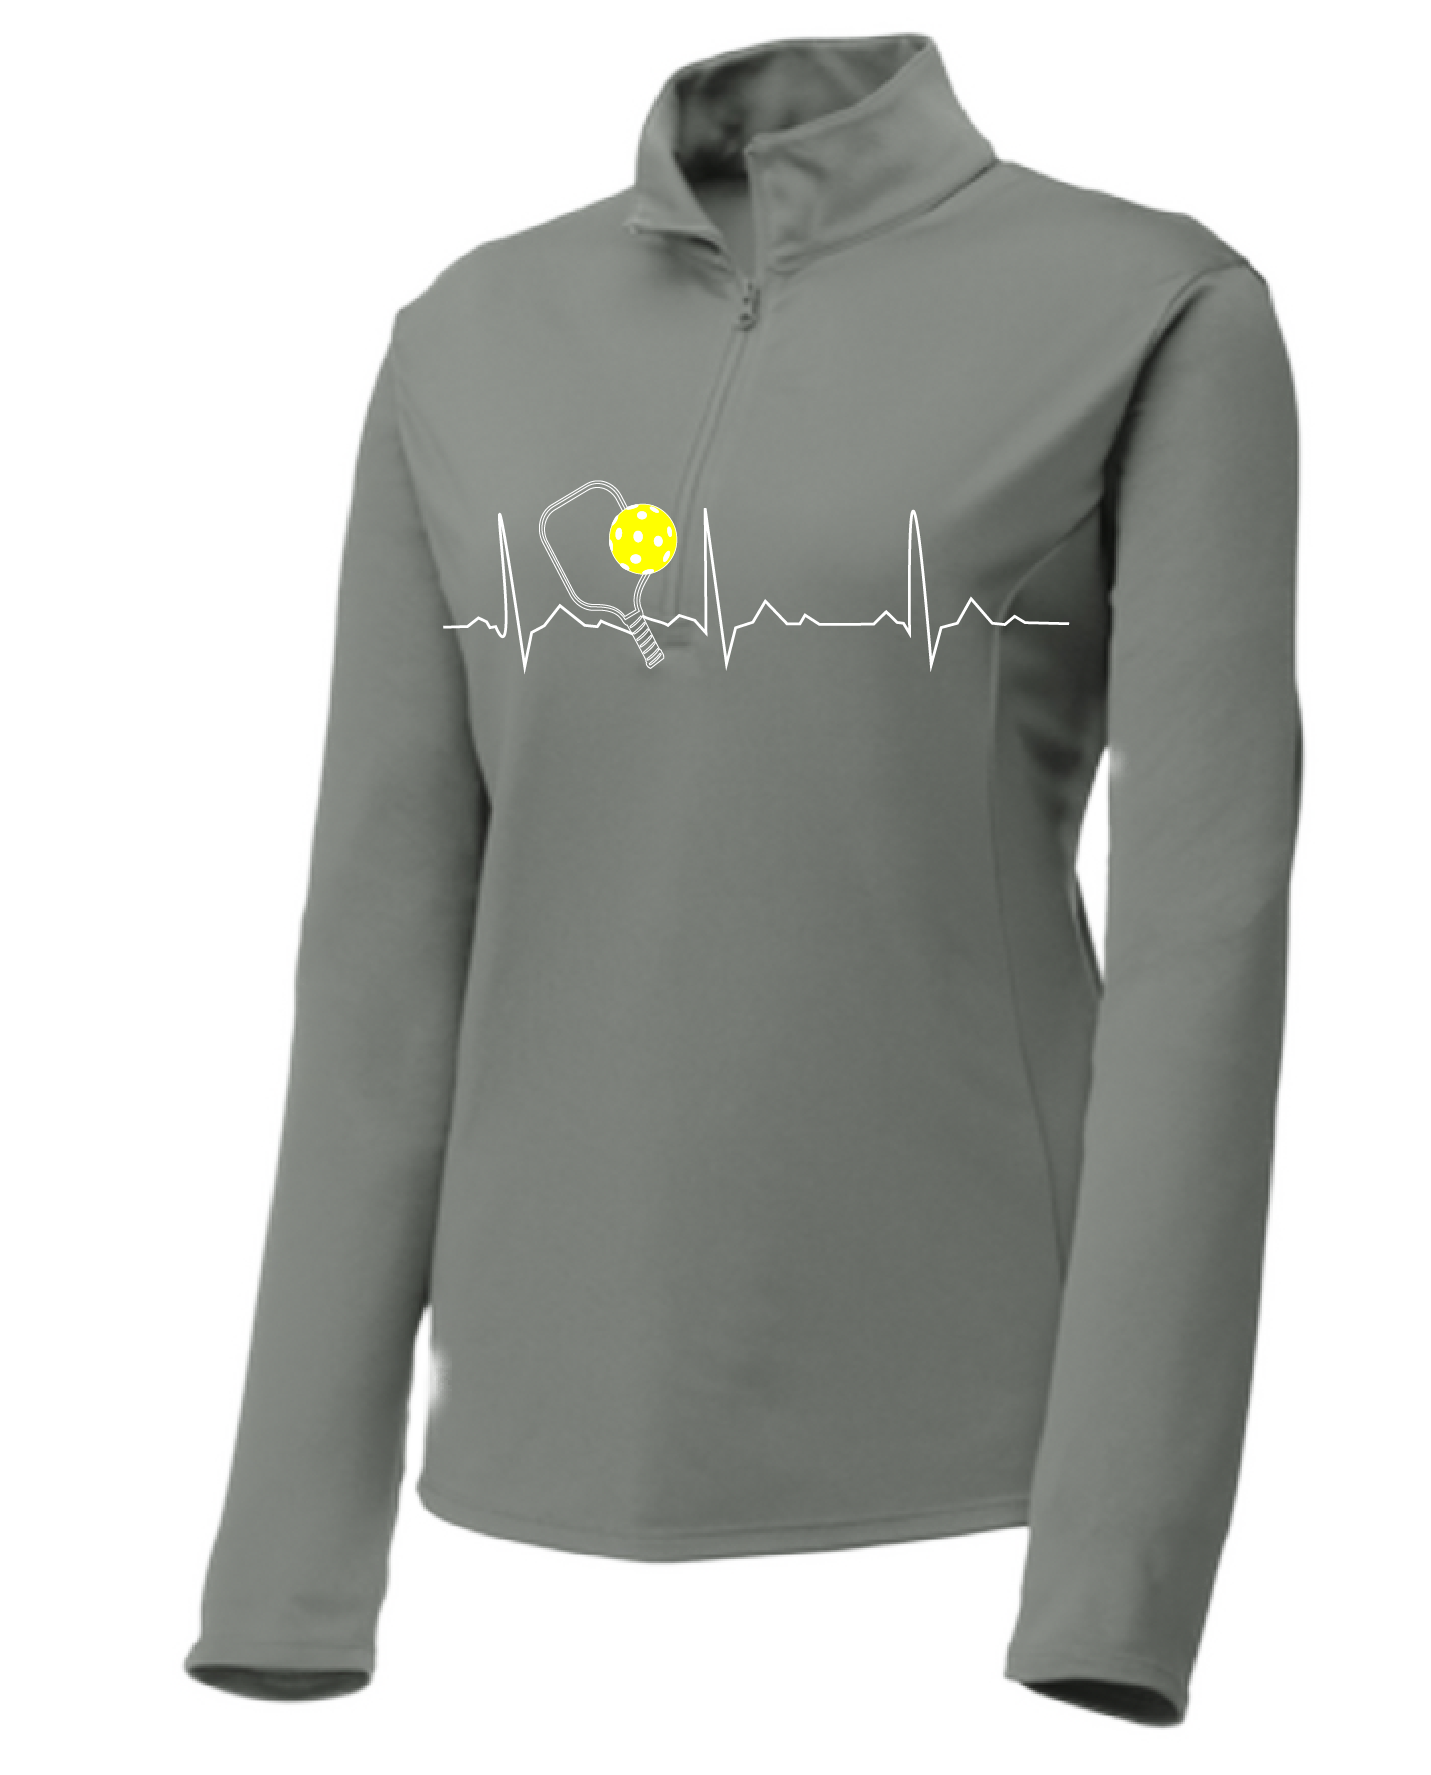 Pickleball Design: Heartbeat Customizable Location  Women's 1/4-Zip Pullover: Princess seams and drop tail hem.  Turn up the volume in this Women's shirt with its perfect mix of softness and attitude. Material is ultra-comfortable with moisture wicking properties and tri-blend softness. PosiCharge technology locks in color. Highly breathable and lightweight. Versatile enough for wearing year-round.